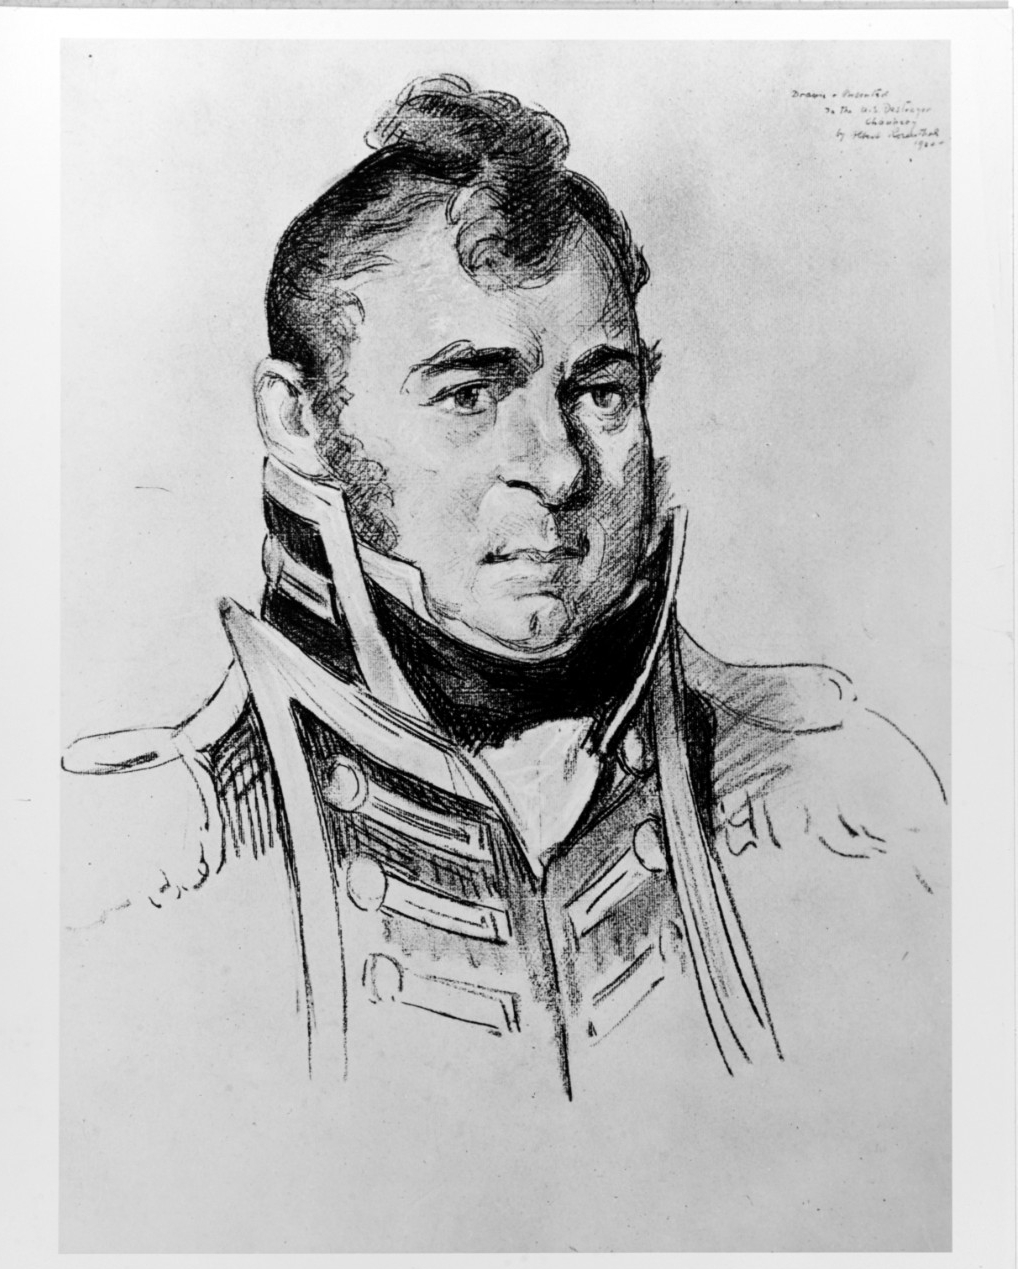 Commodore Isaac Chauncey, USN (1772–1840). Drawing by Albert Rosenthal, 1920. The original artwork was presented to Chauncey (DD-296). (Naval History and Heritage Command Photograph NH 51626)